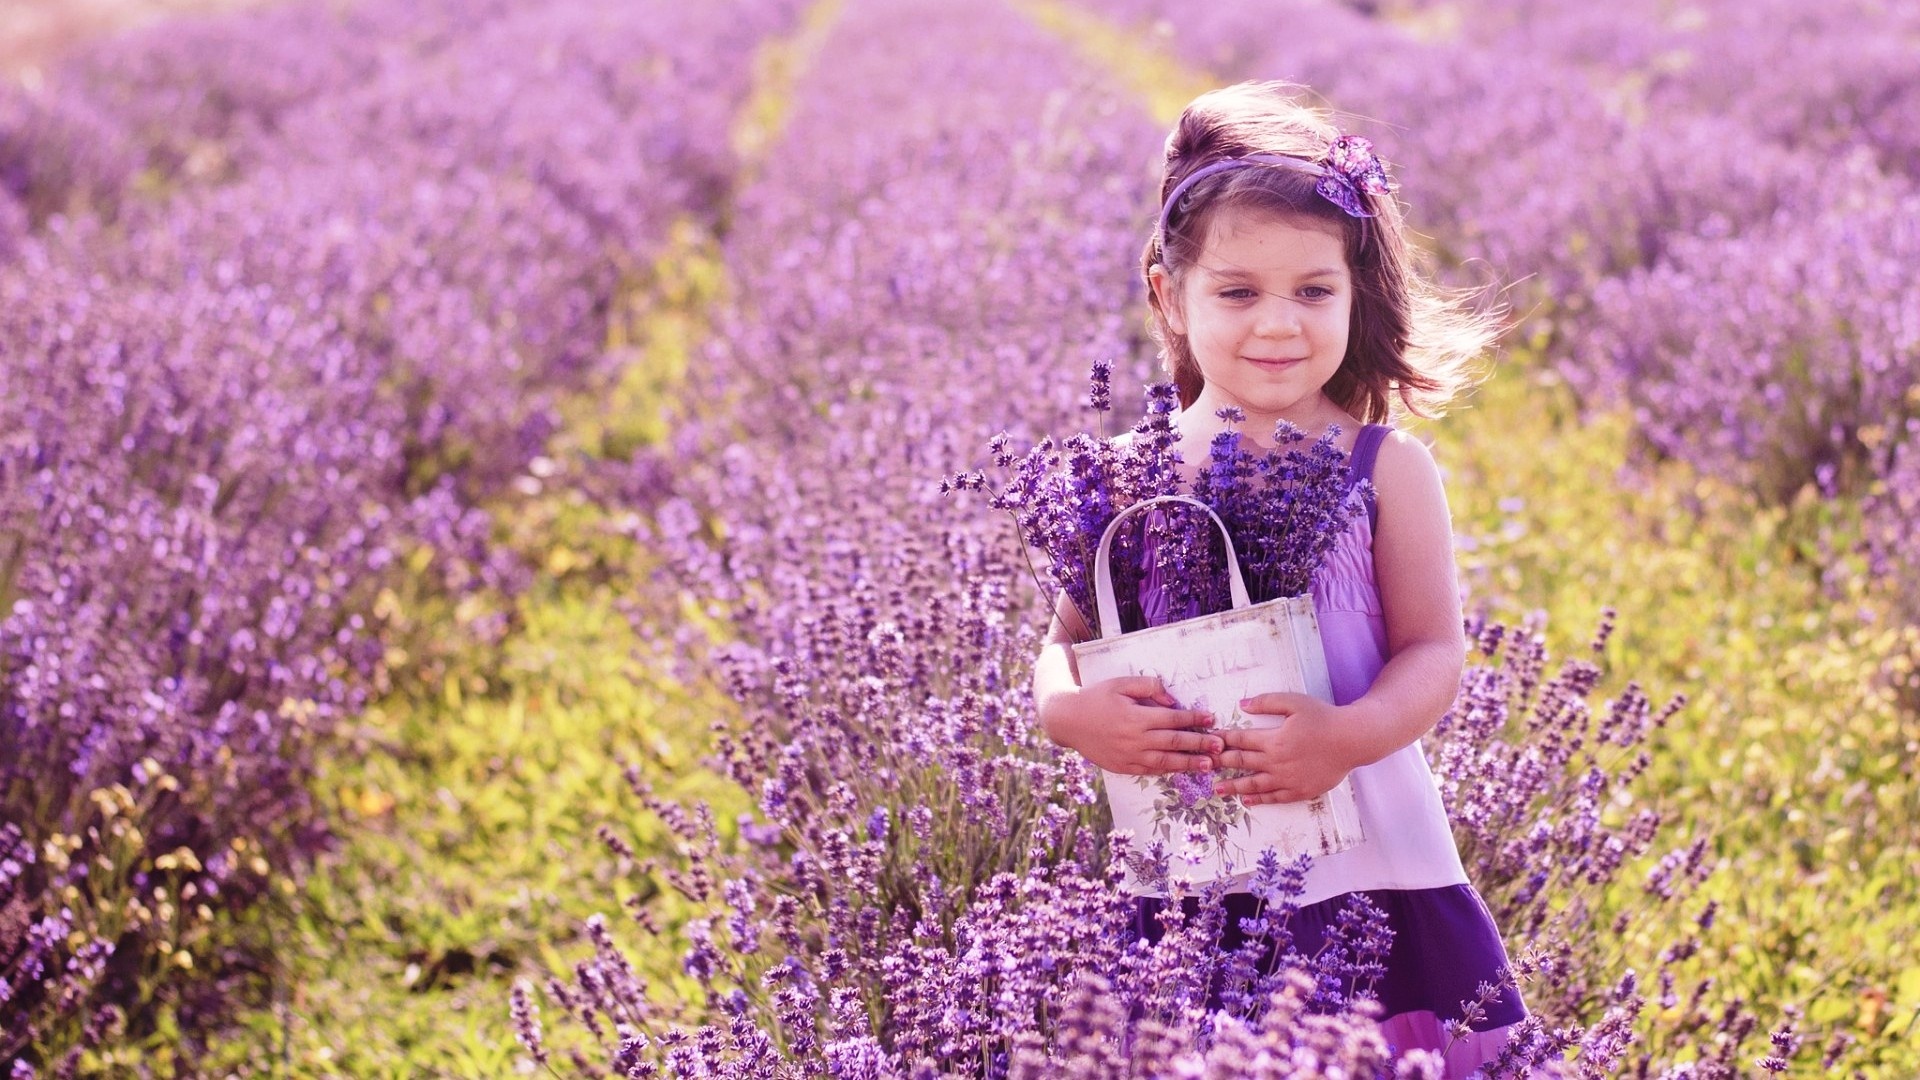 Lavender Flowers Background Wallpaper High Definition Quality